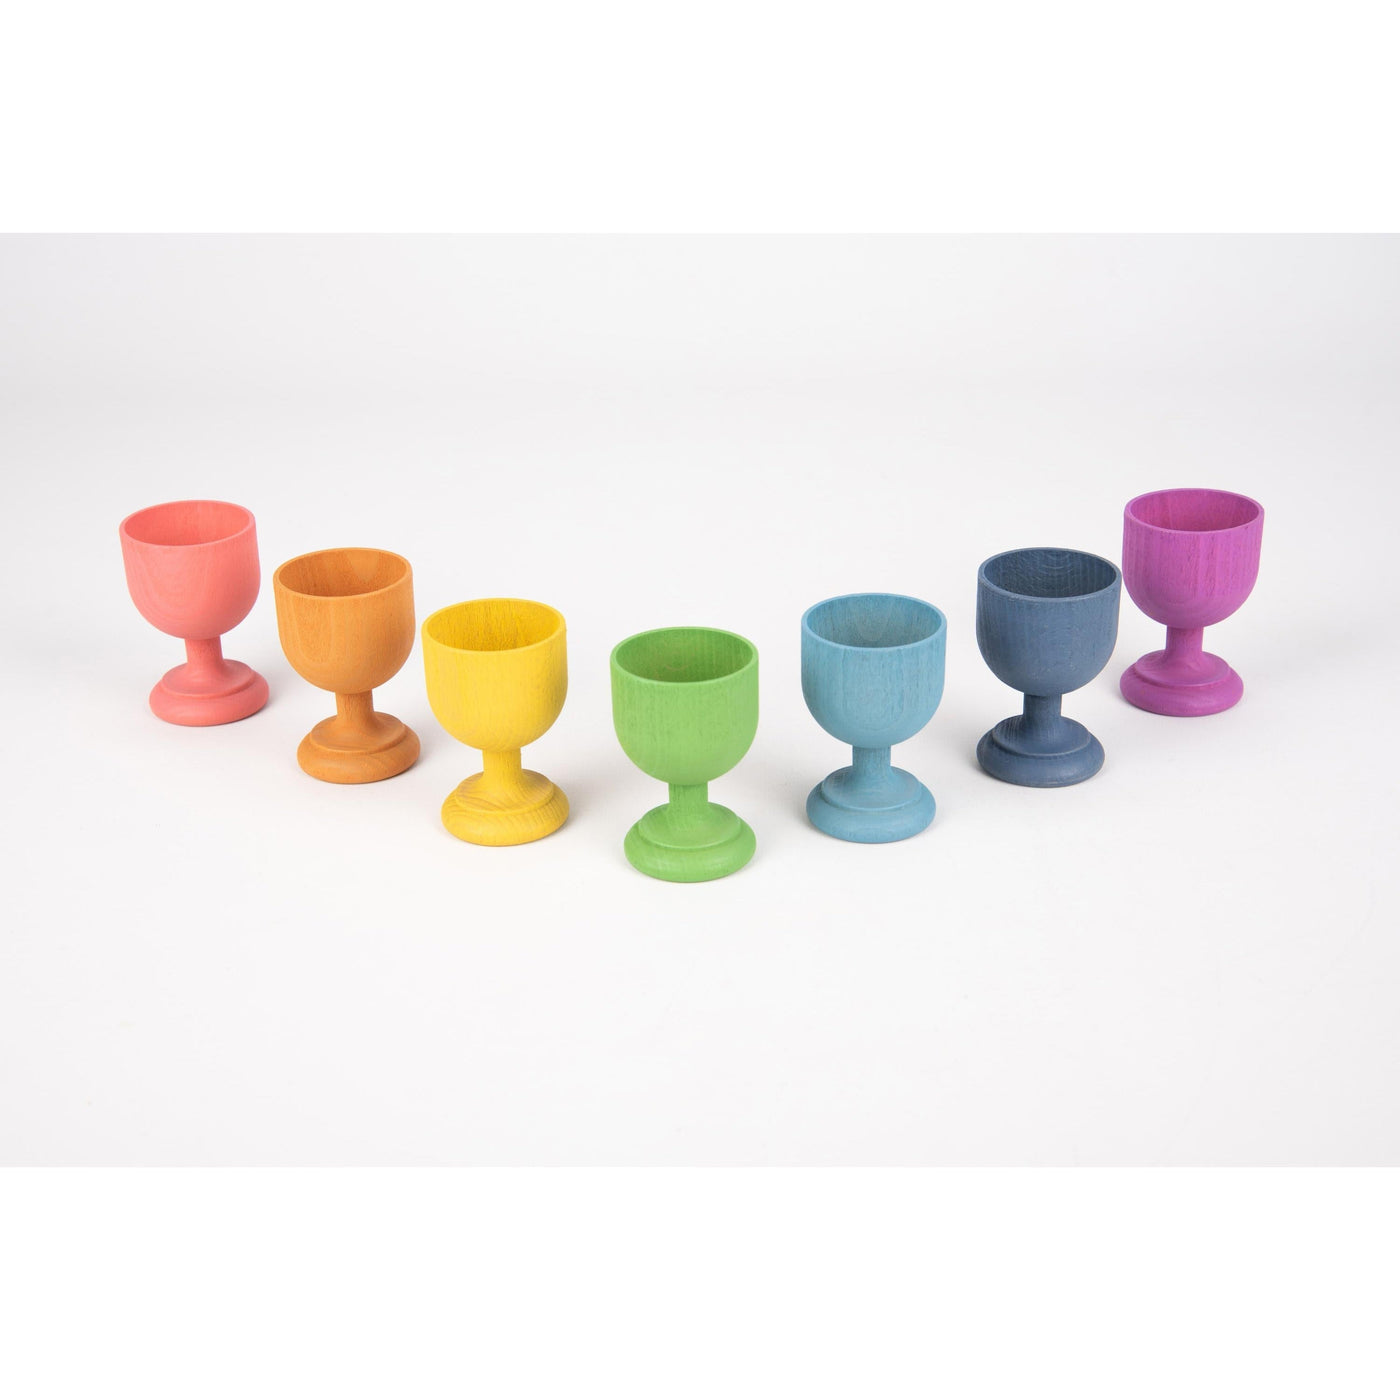 TickIT Wooden Egg Cups - For Loose Part Play